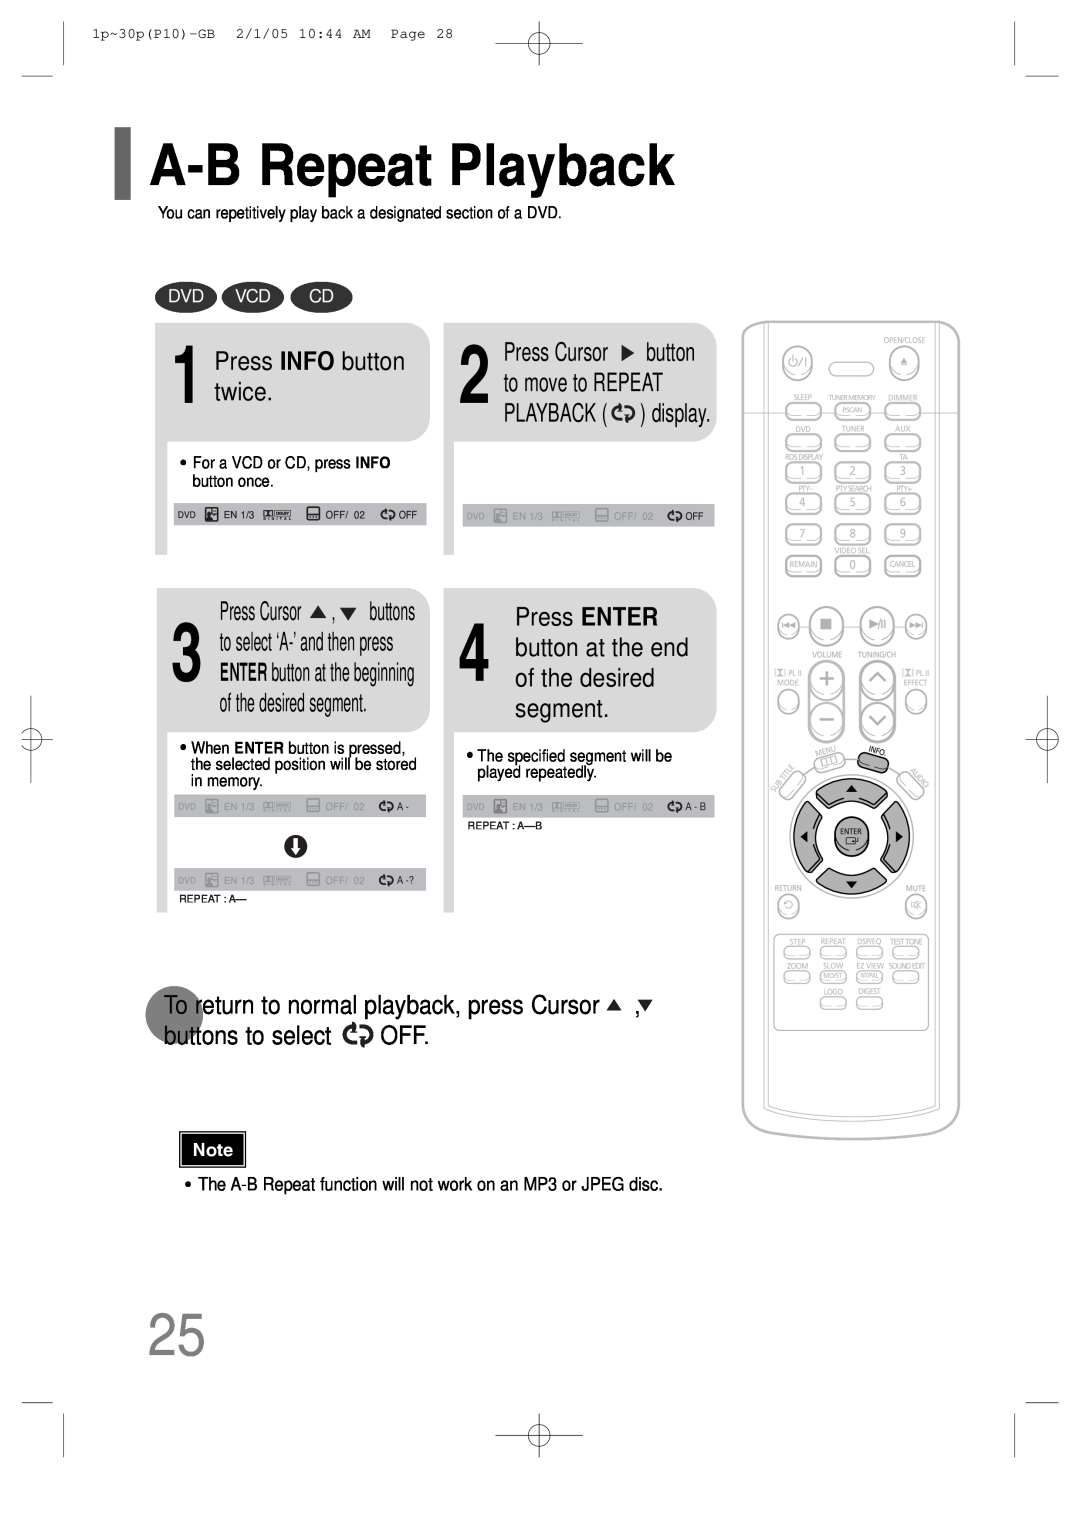 Samsung P10 A-BRepeat Playback, Press INFO button twice, Press ENTER, button at the end of the desired segment, Dvd Vcd Cd 